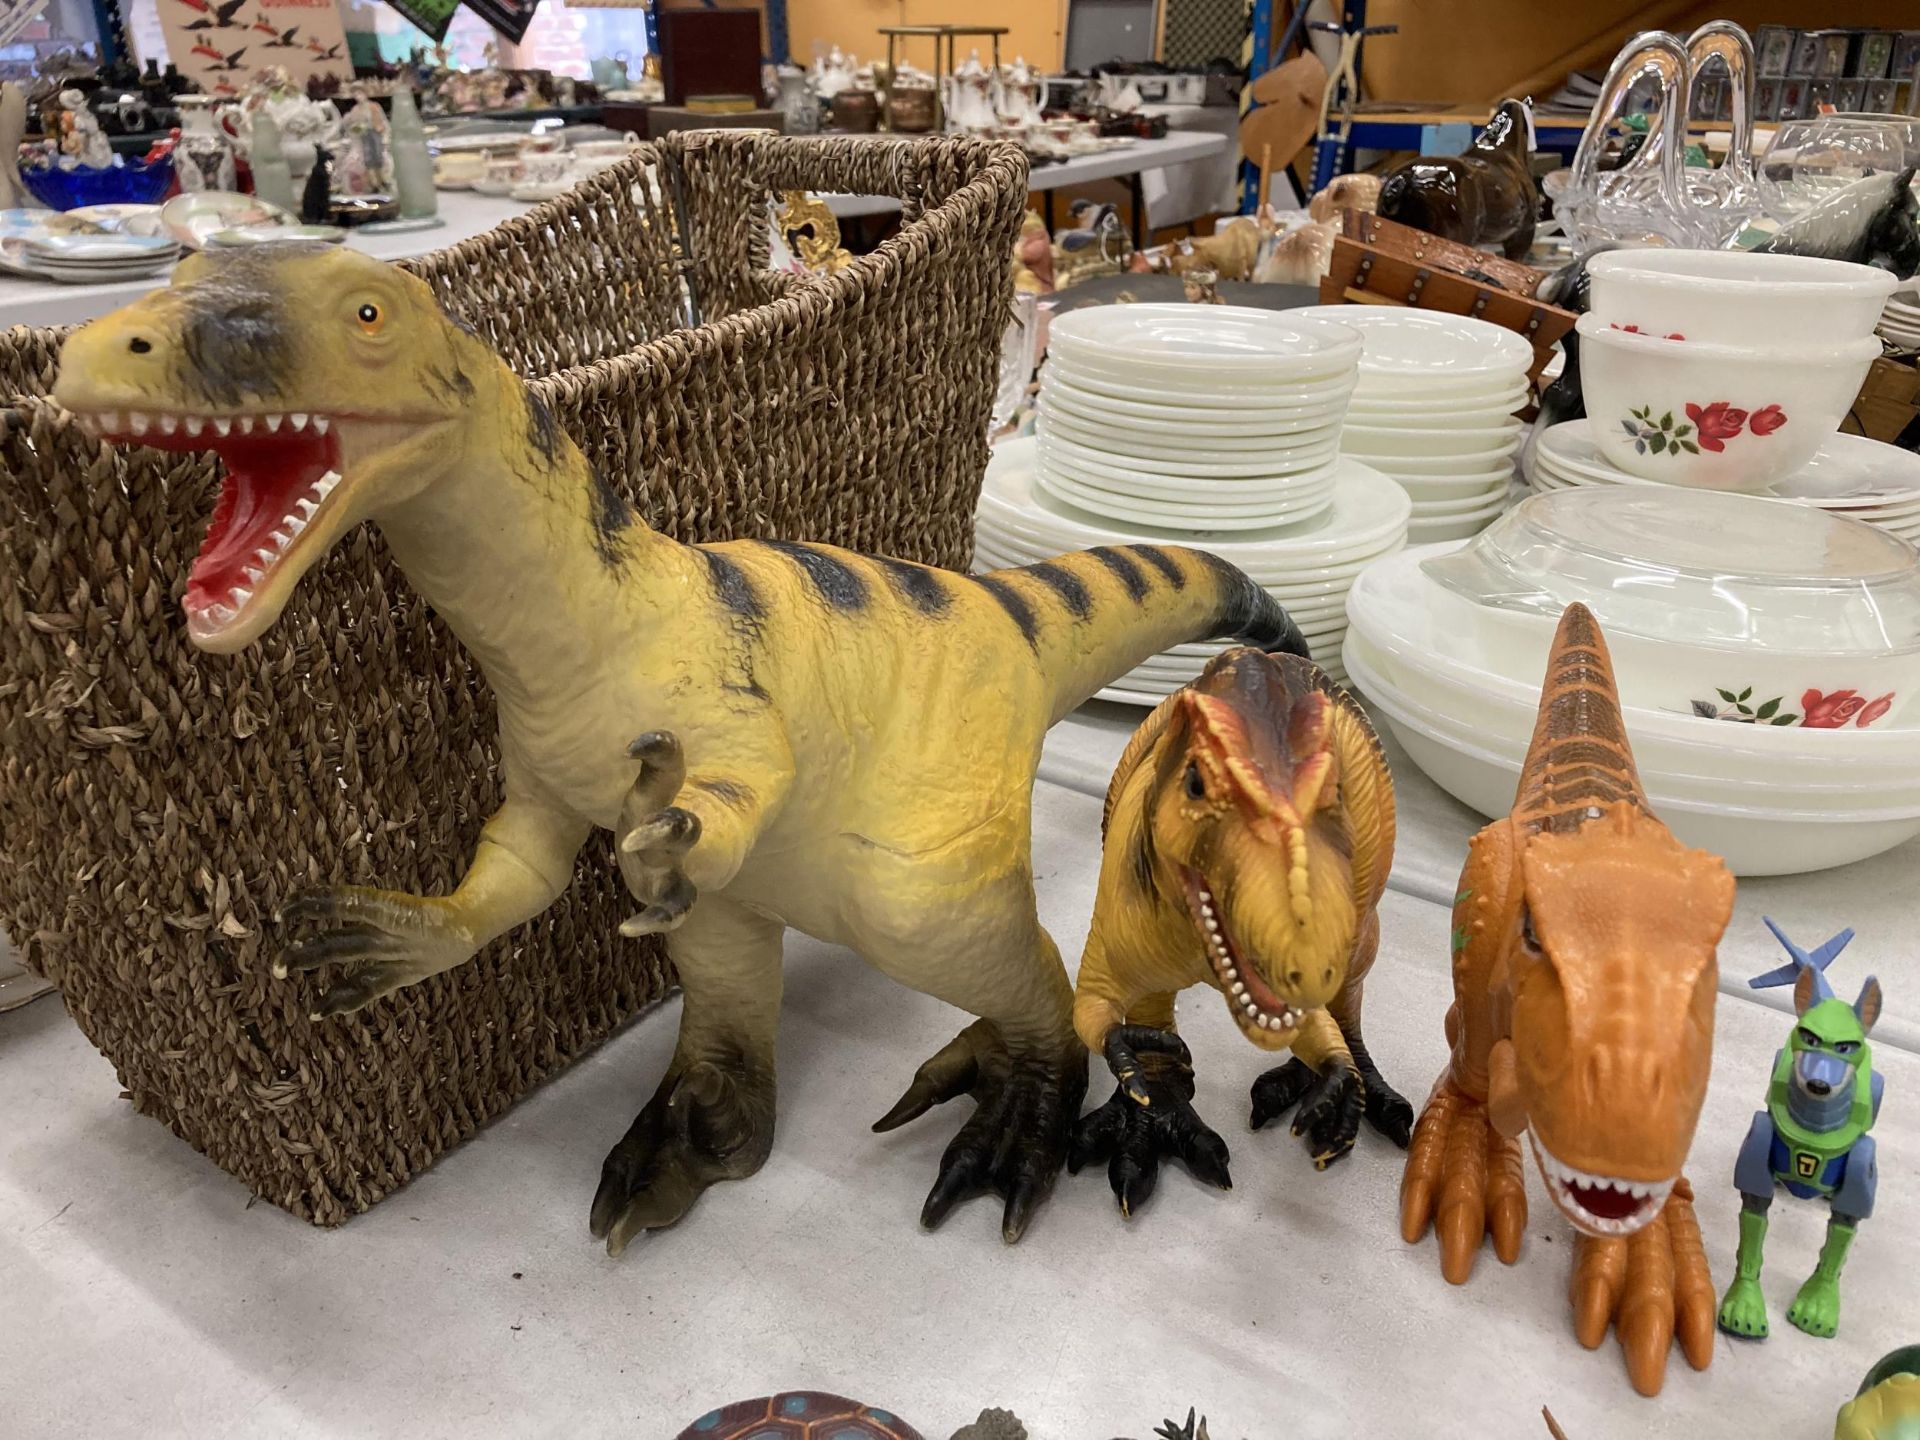 A COLLECTION OF DINOSAURS, ETC IN A BASKET - Image 3 of 5